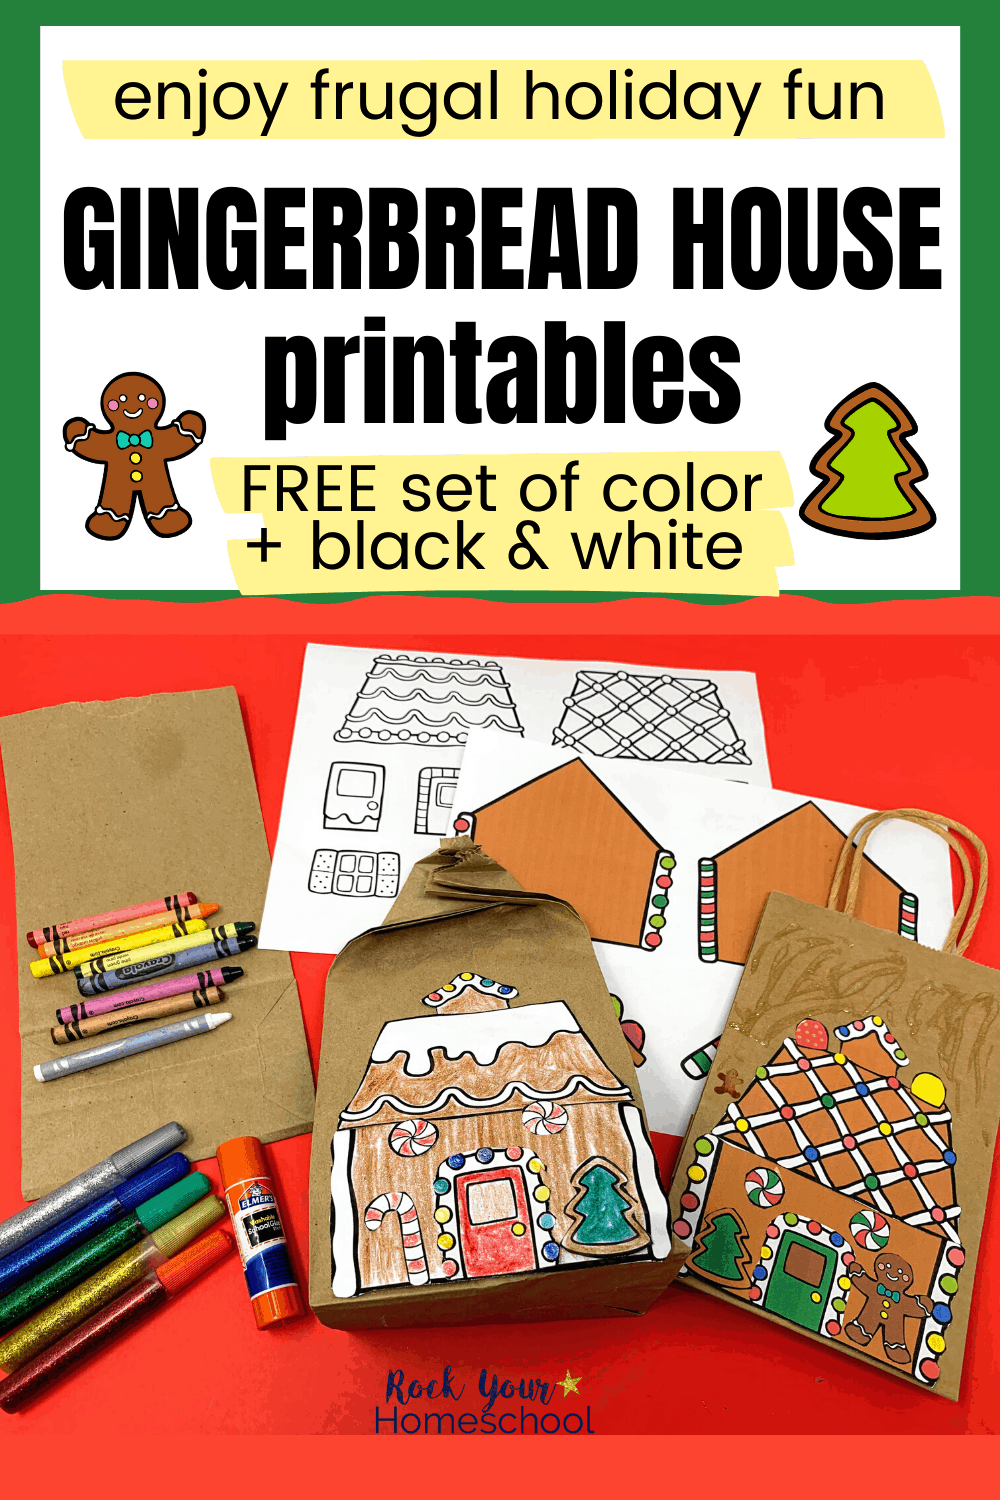 Gingerbread House Printables With Frugal Fun Ways To Use Free 